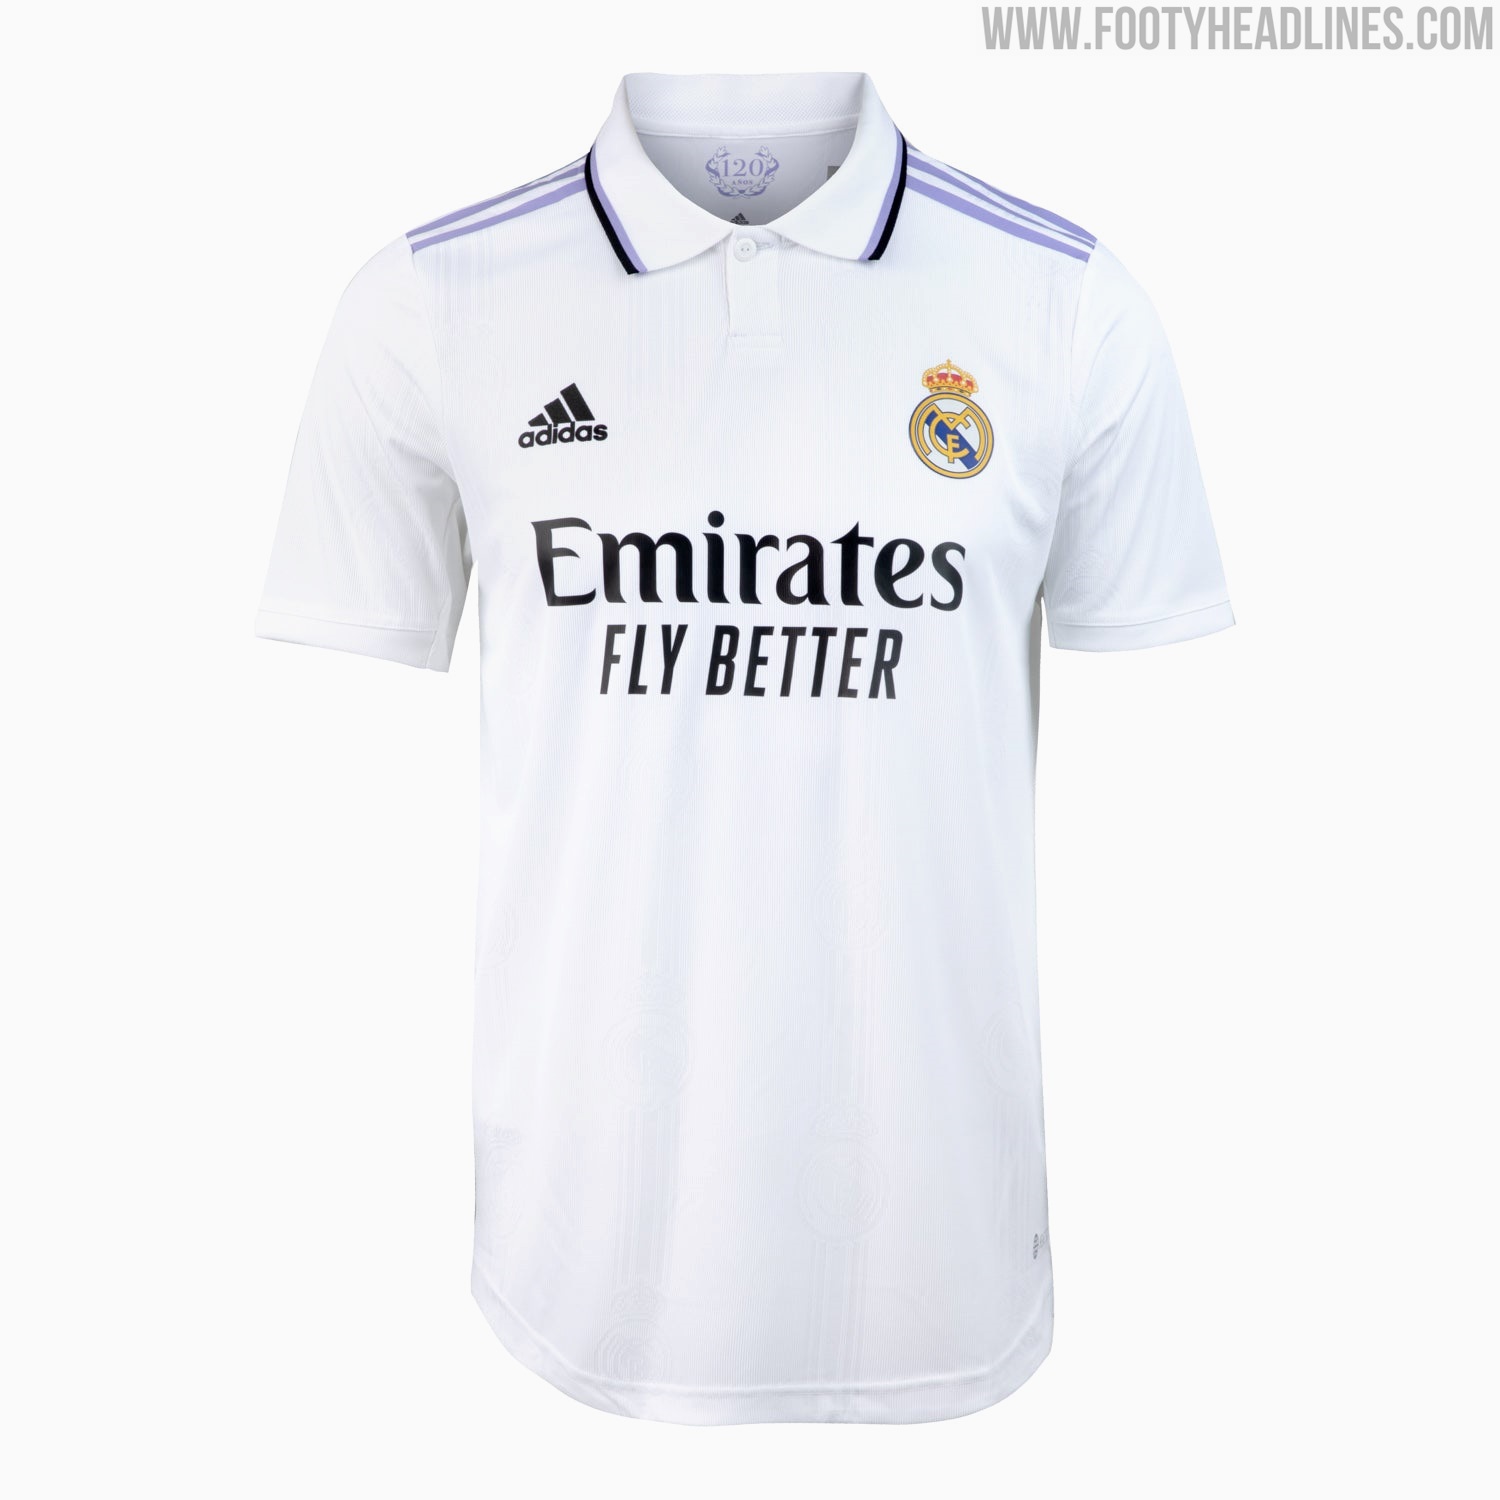 Real Madrid release 120th anniversary home kit for 2022-23 that